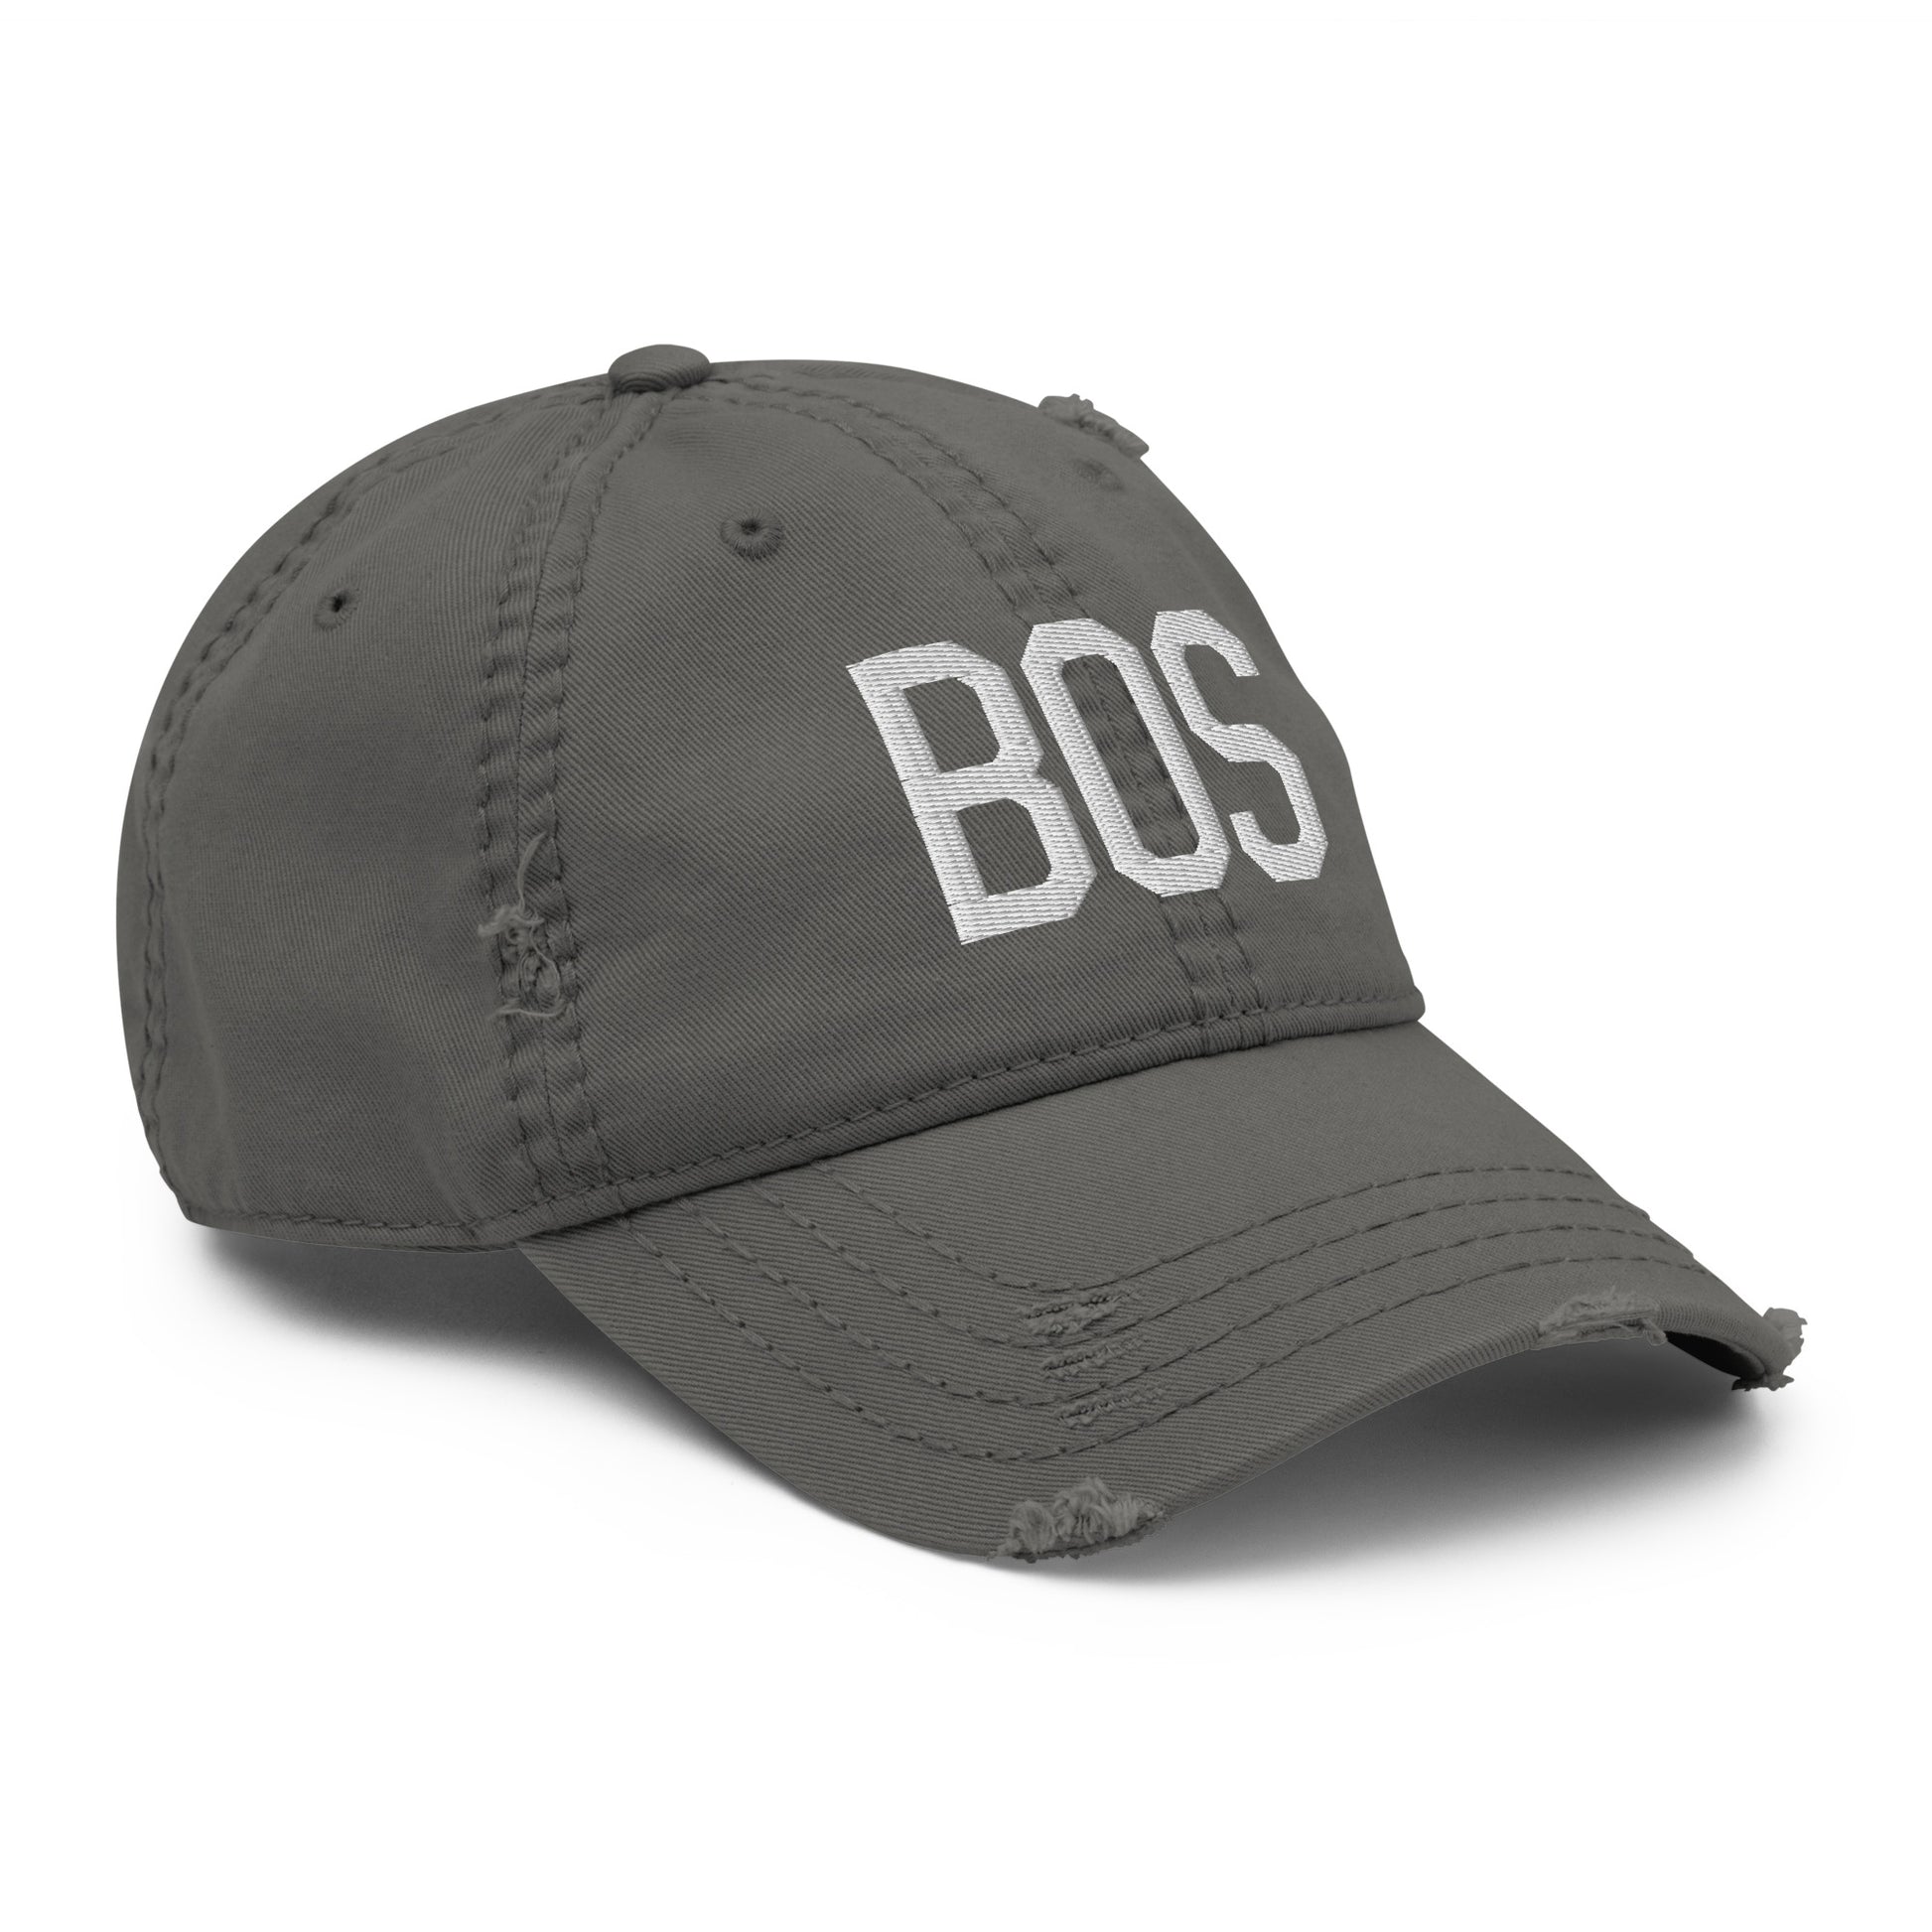 Airport Code Distressed Hat - White • BOS Boston • YHM Designs - Image 17